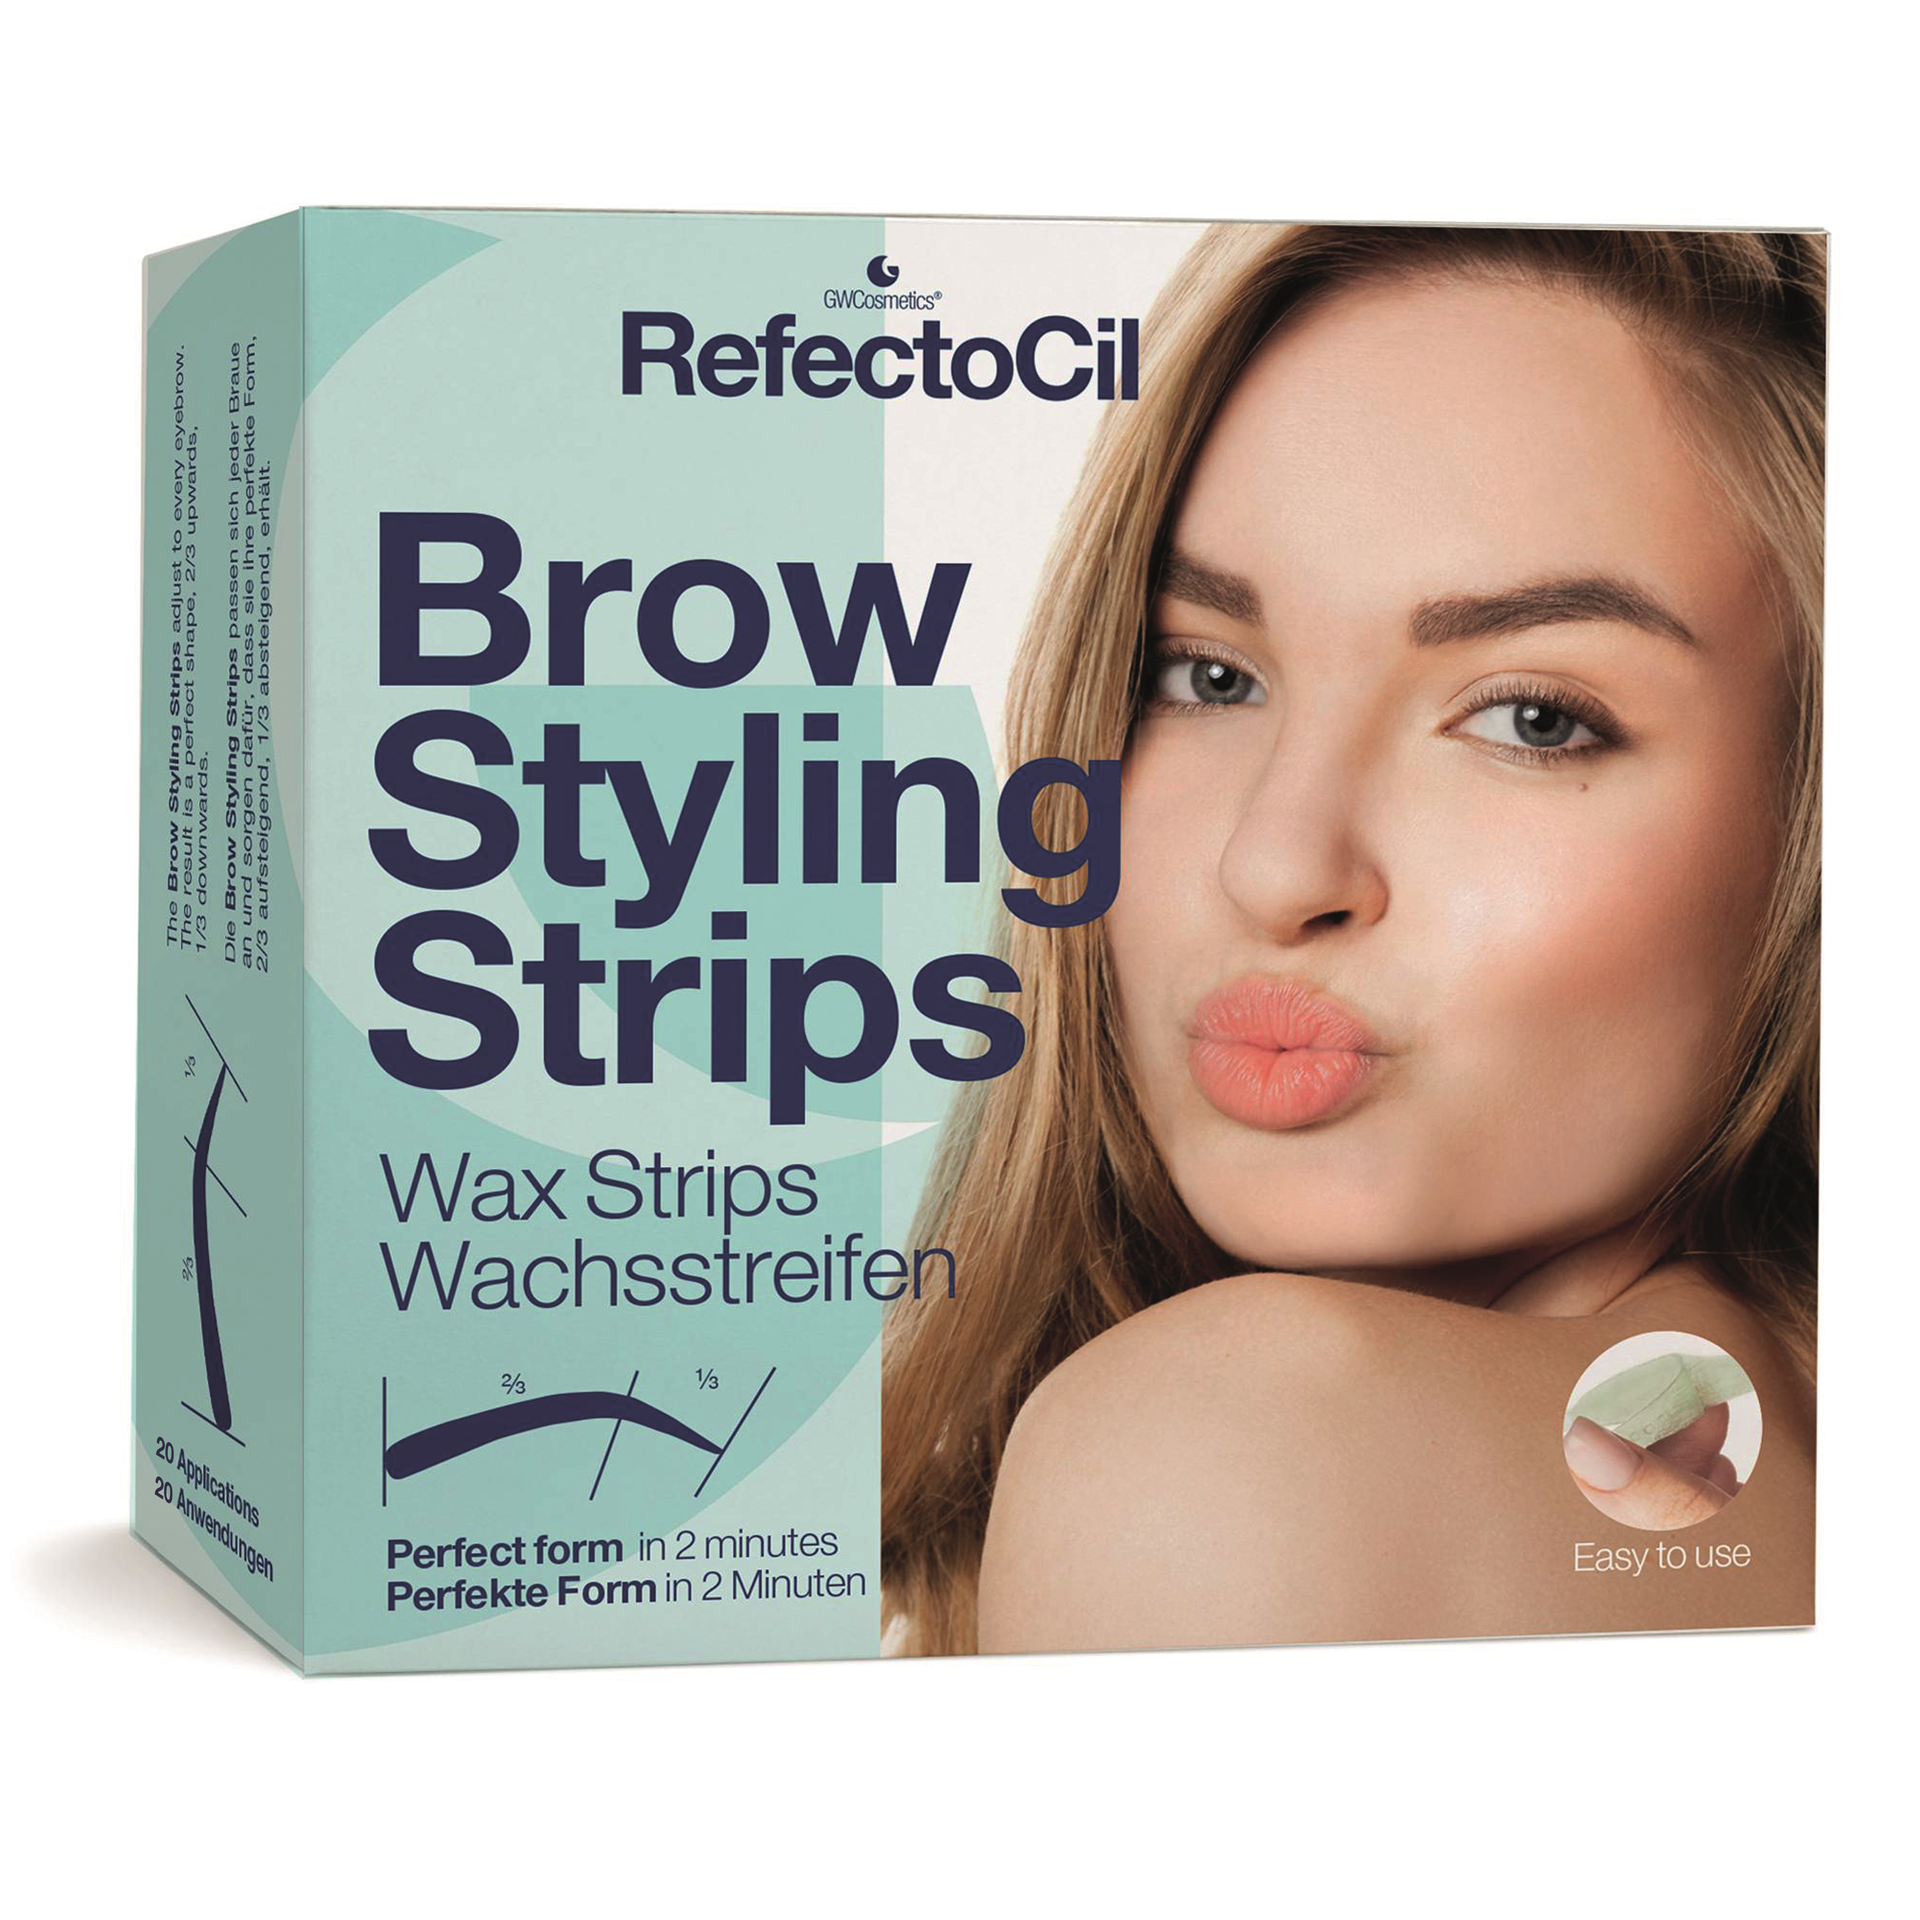 RefectoCil® Brow Styling Strips